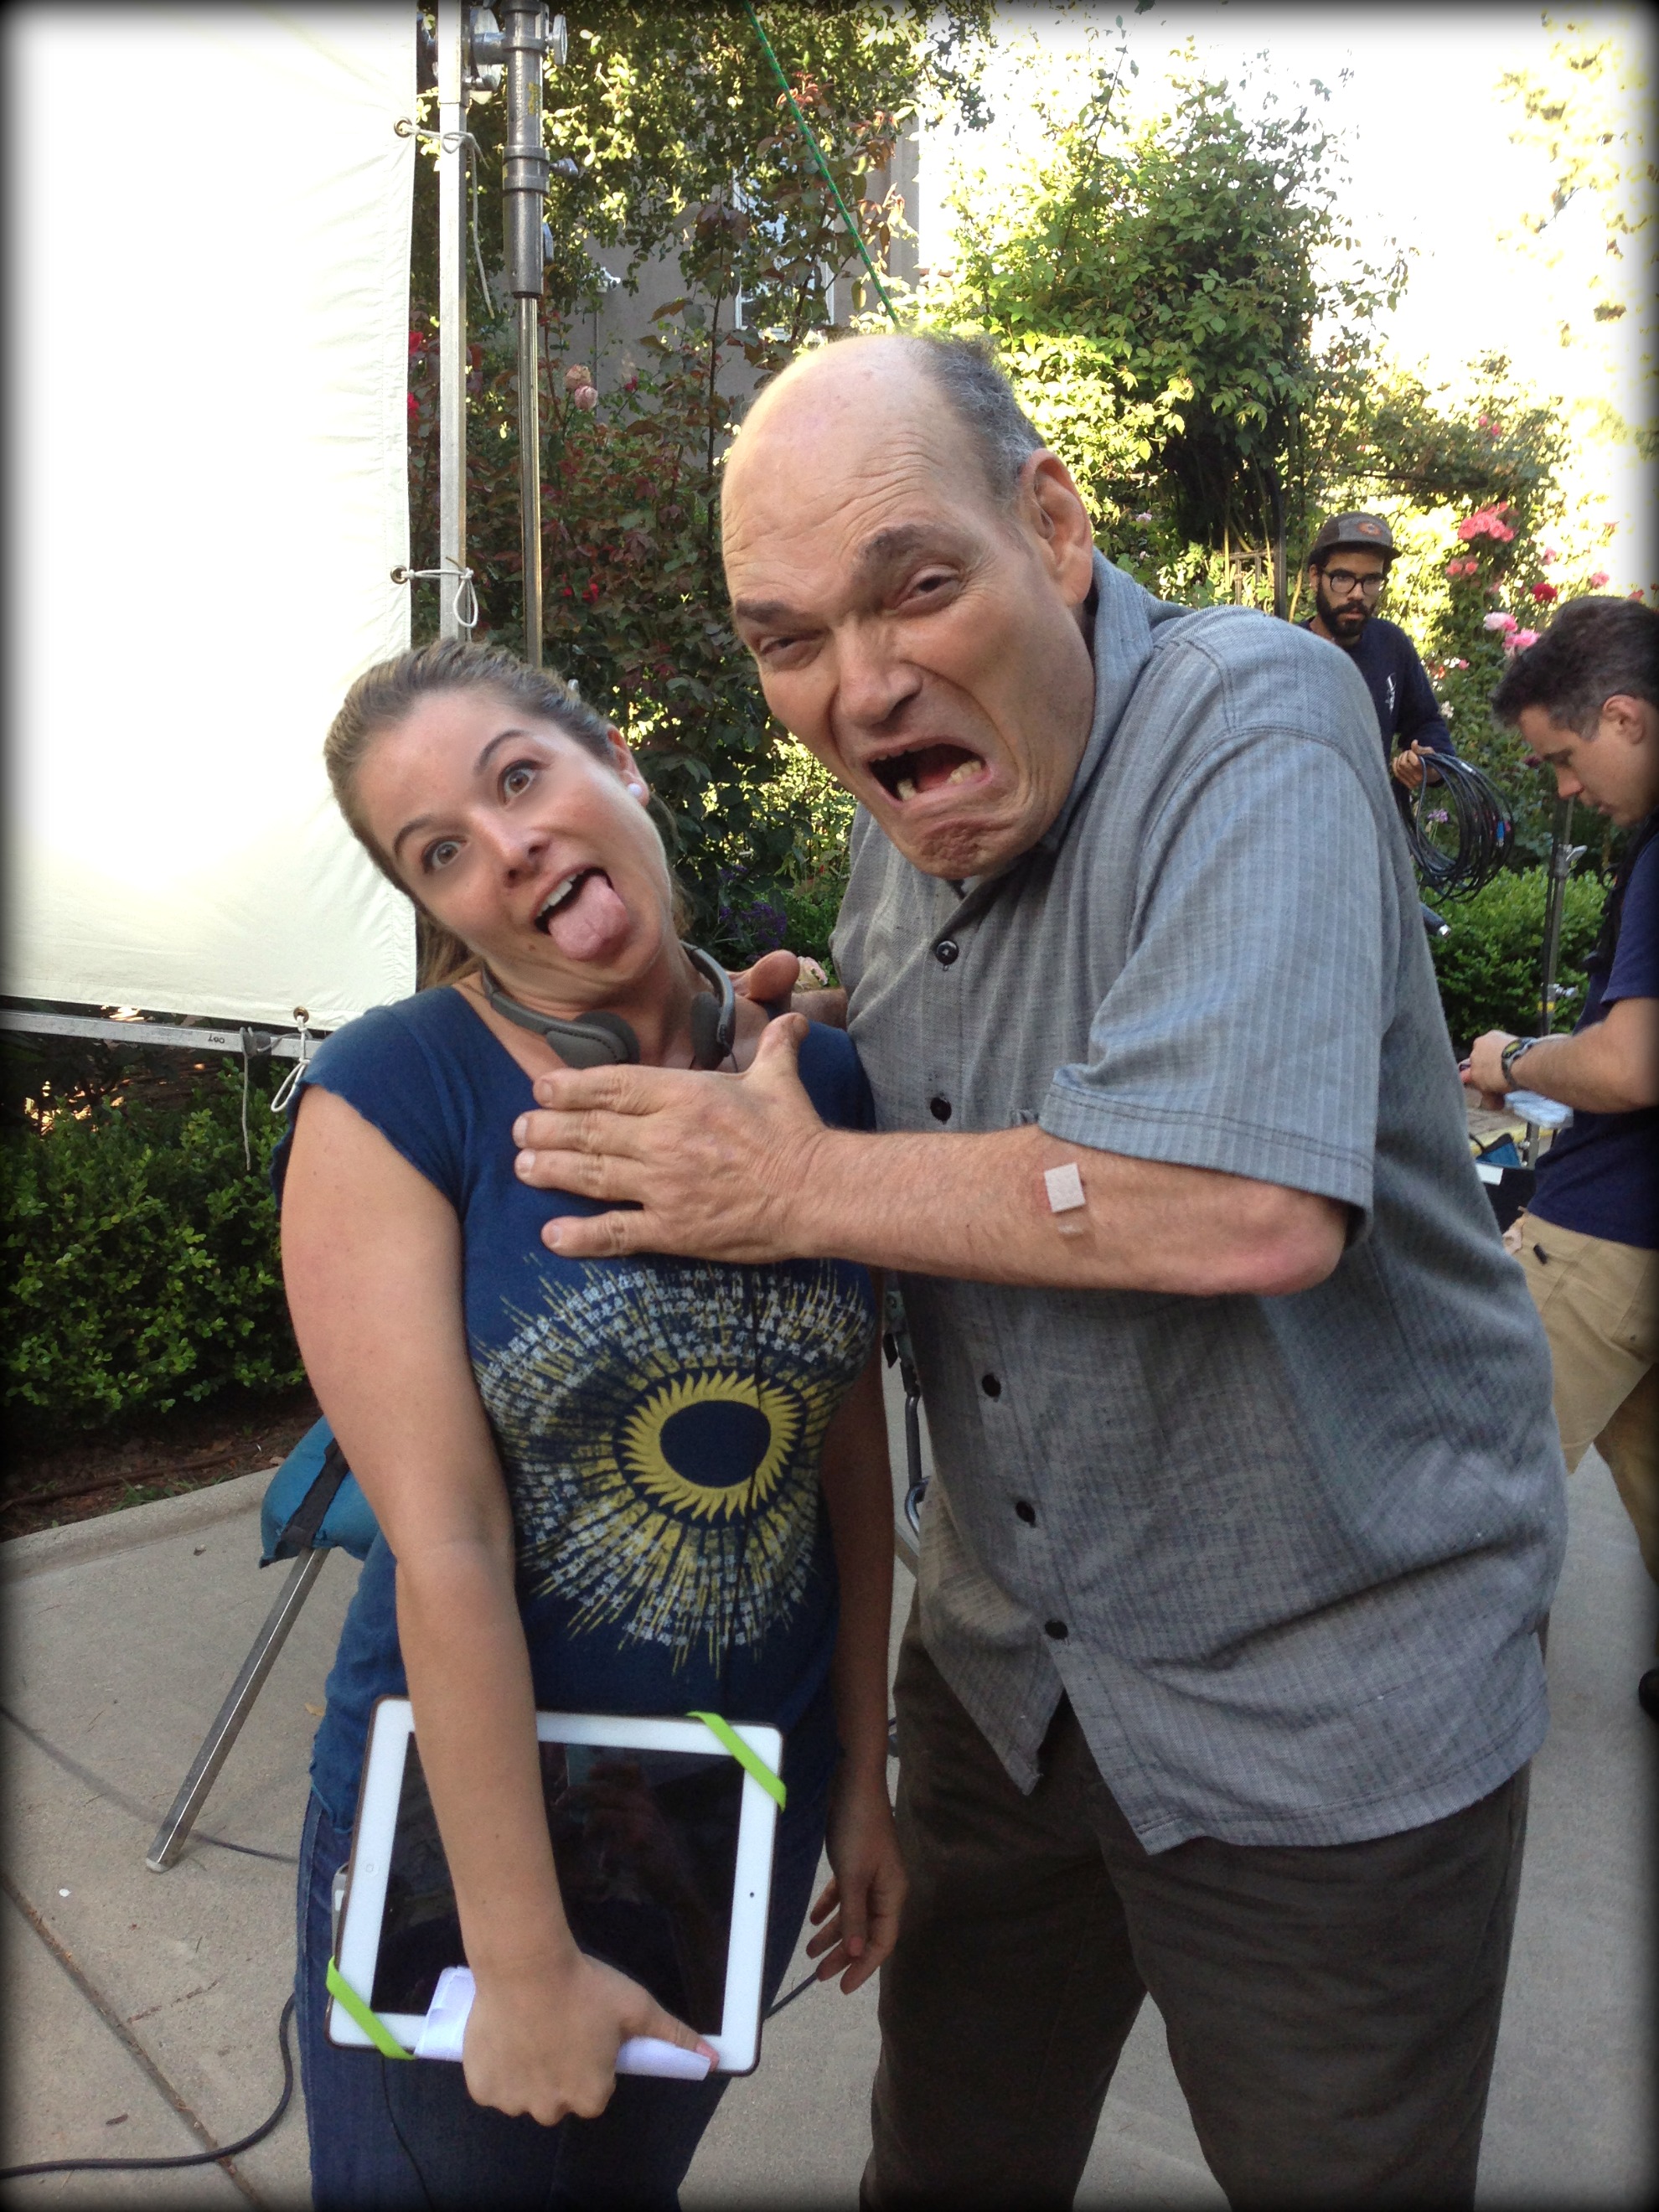 Sara Geralds and Irwin Keyes reenact the horror! On the set of 